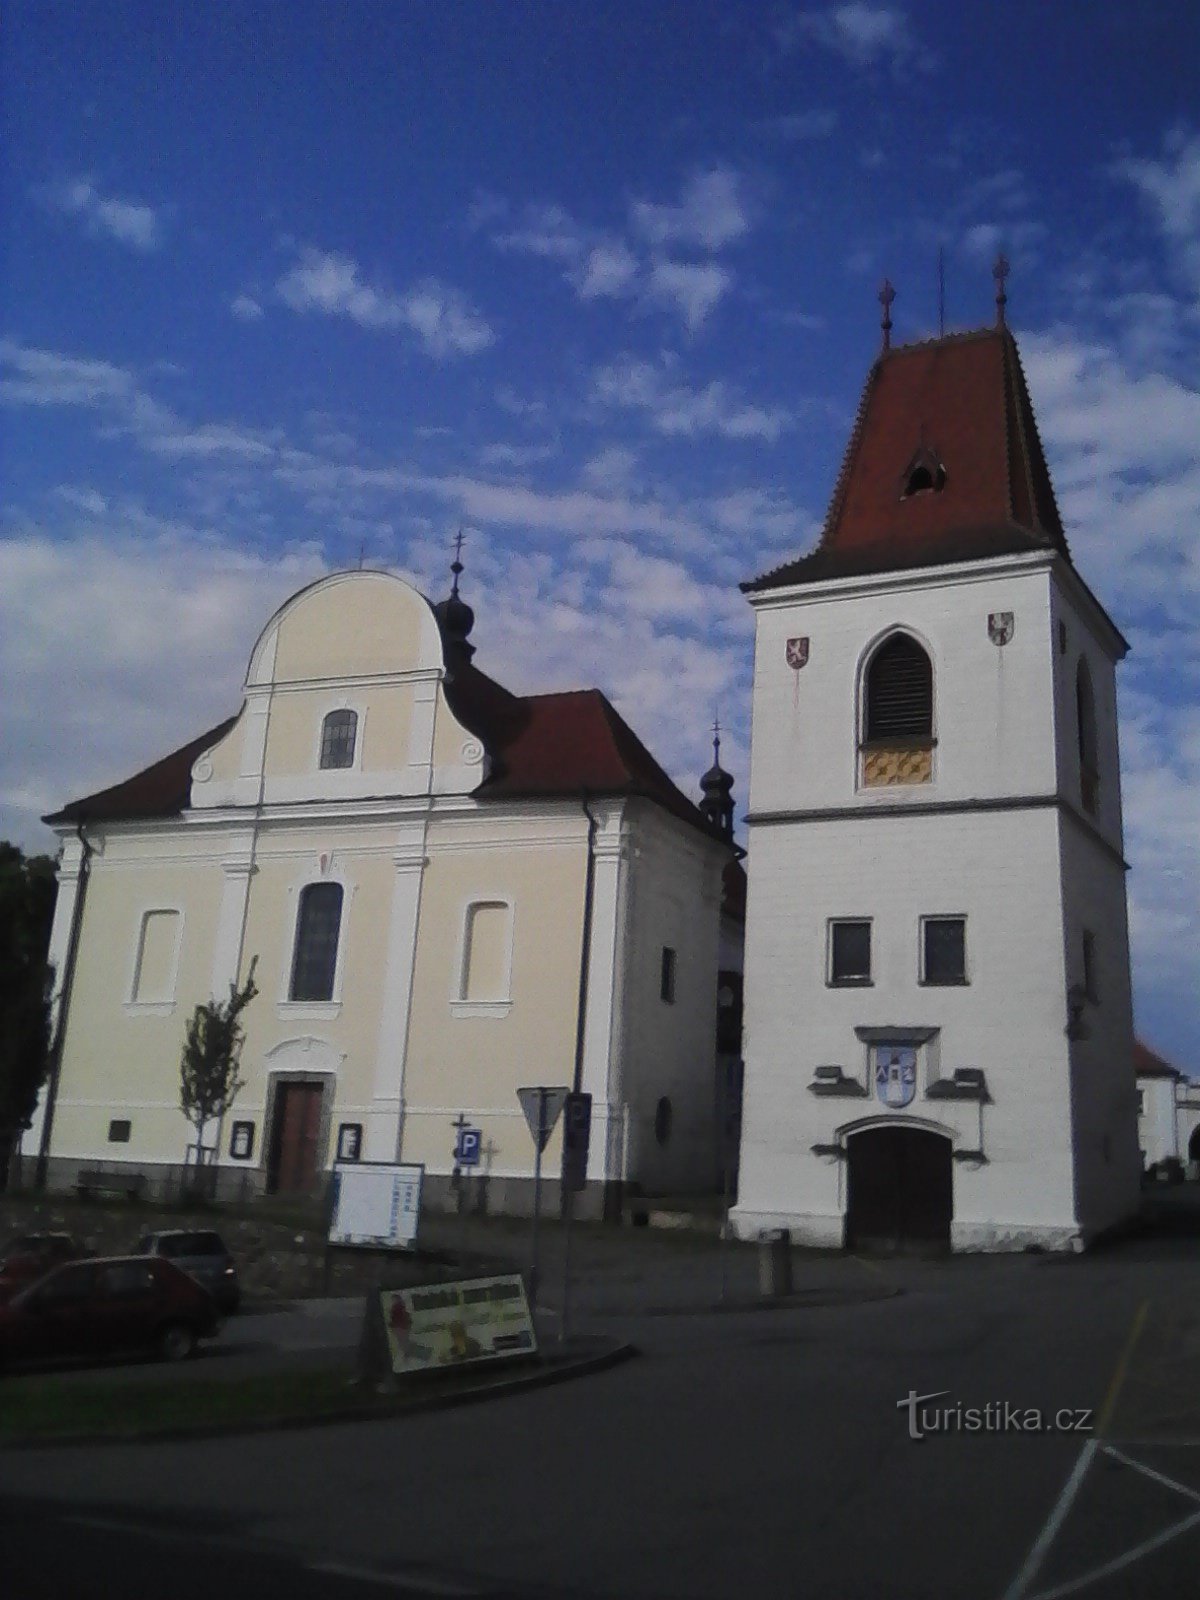 1. Bell tower and church of St. Martin in Mladá Vožica